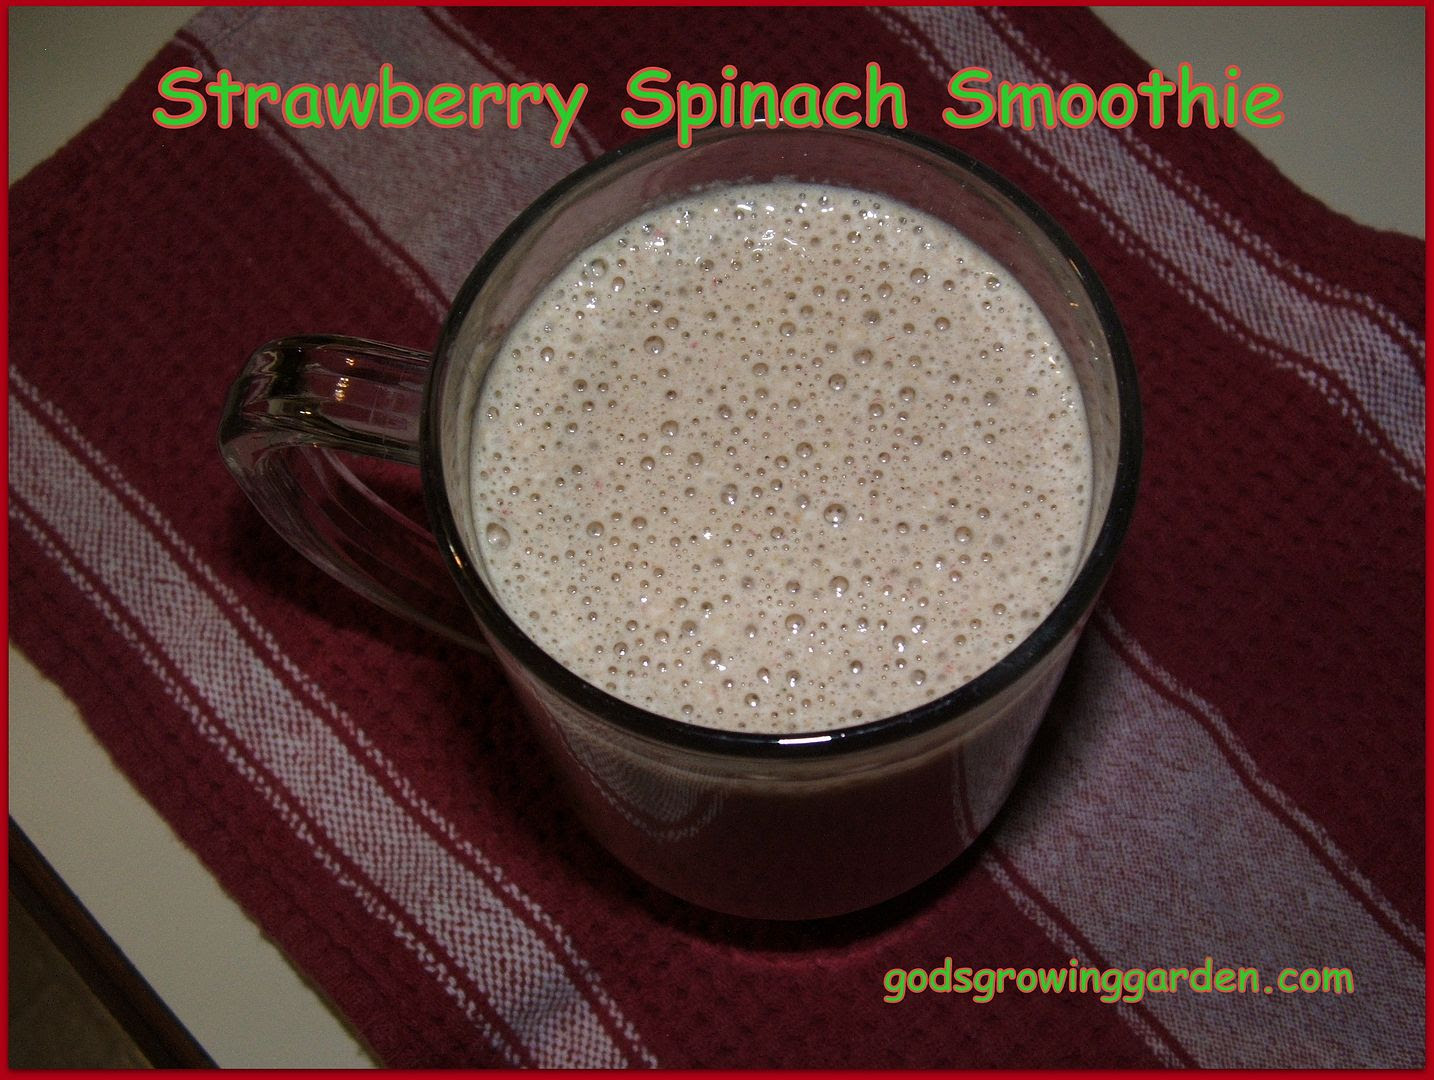 Strawberry Spinach Smoothie by Angie Ouellette-Tower for godsgrowinggarden.com photo 007_zps9d4f34f8.jpg